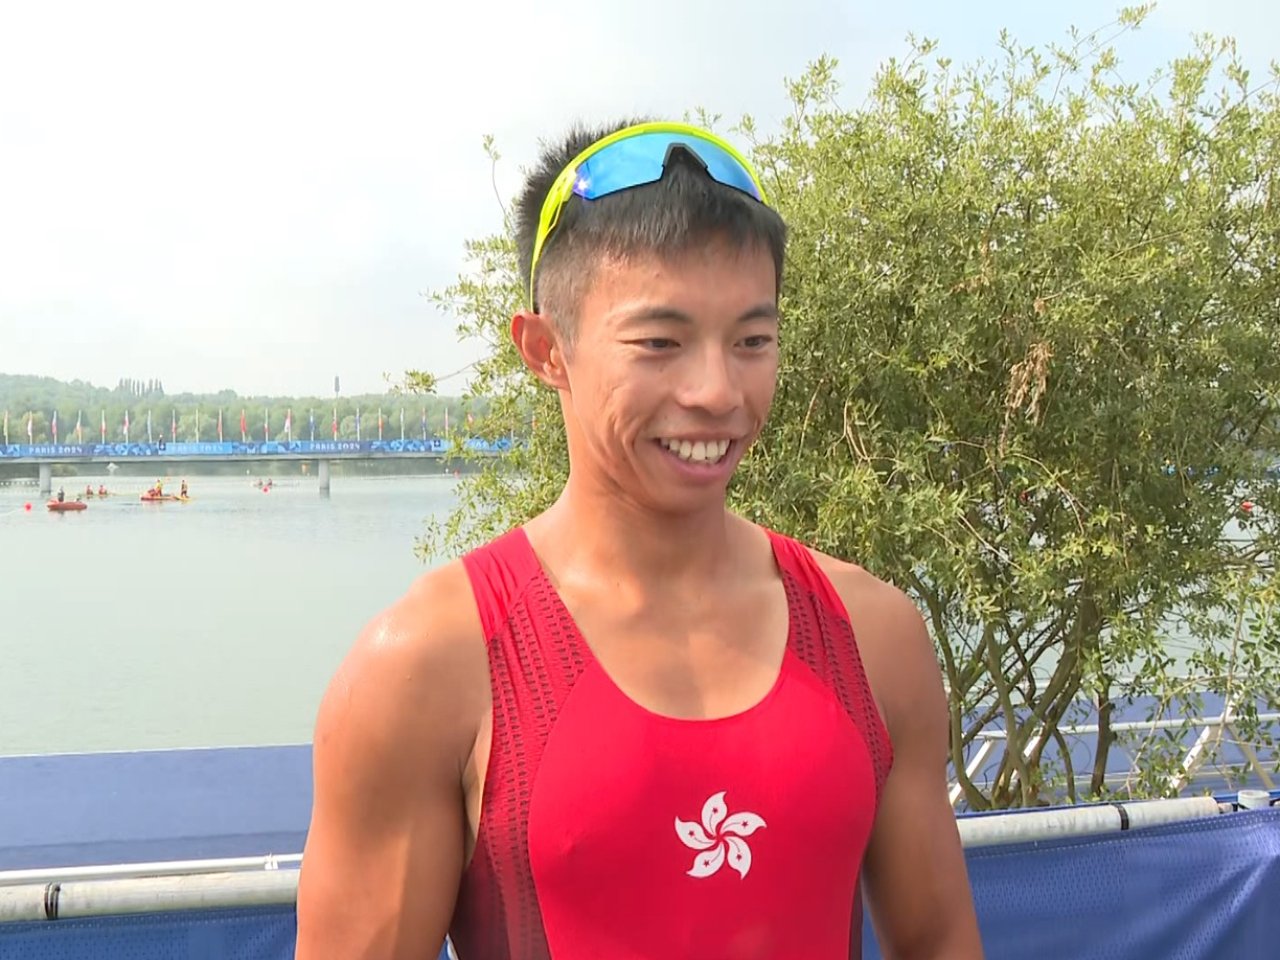 Chiu completes Olympic rowing events